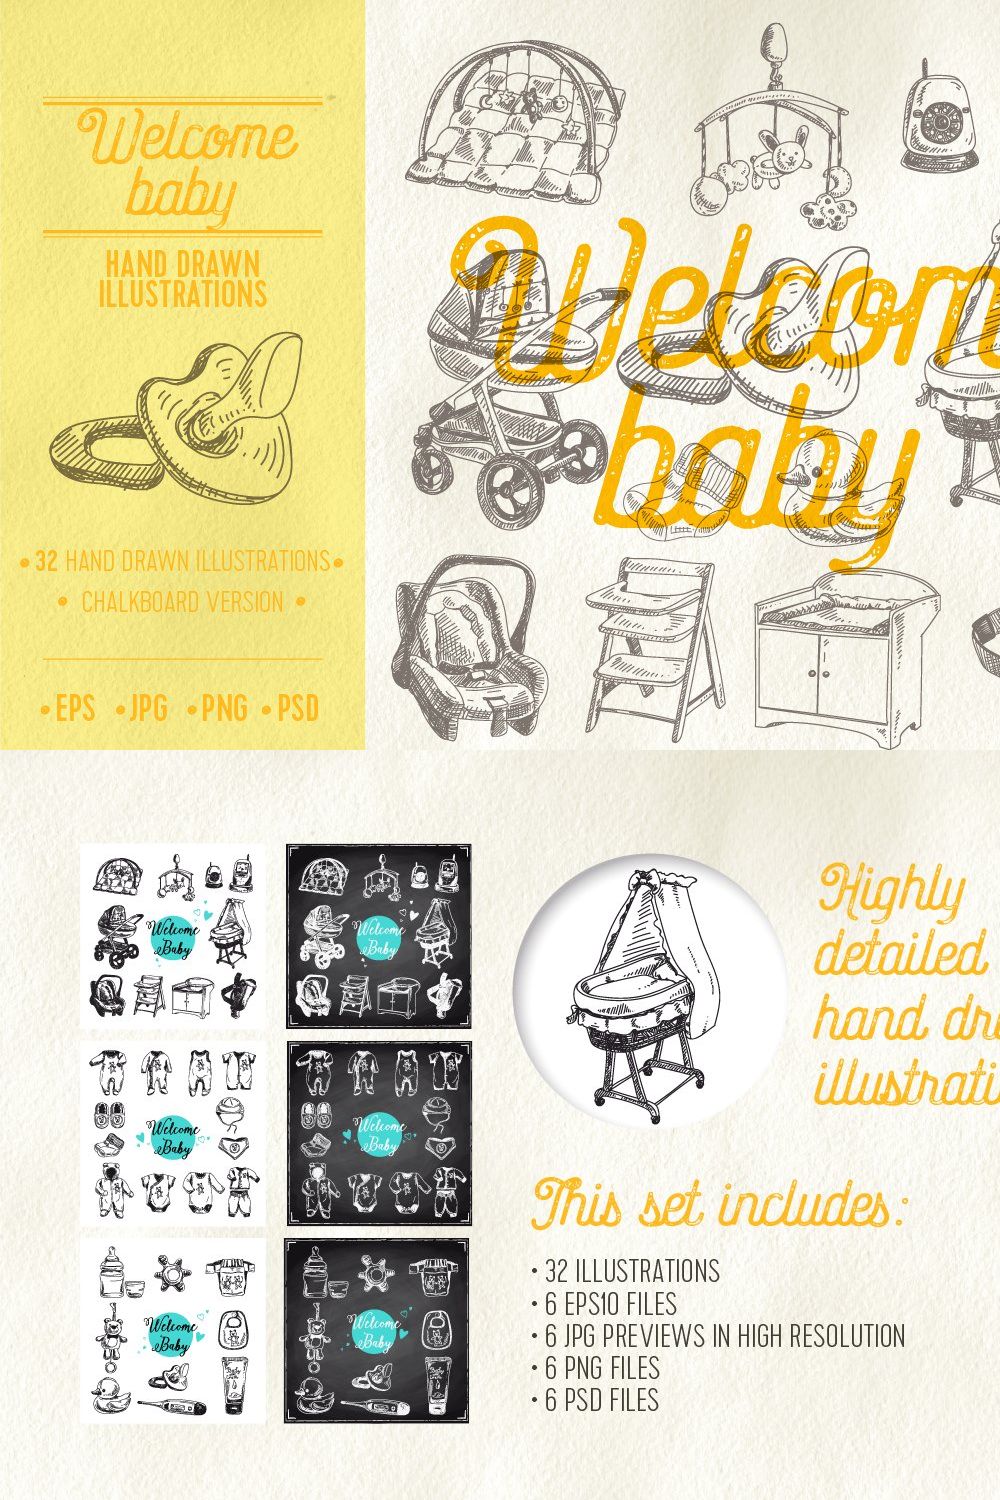 Welcome baby sketch illustrations pinterest preview image.